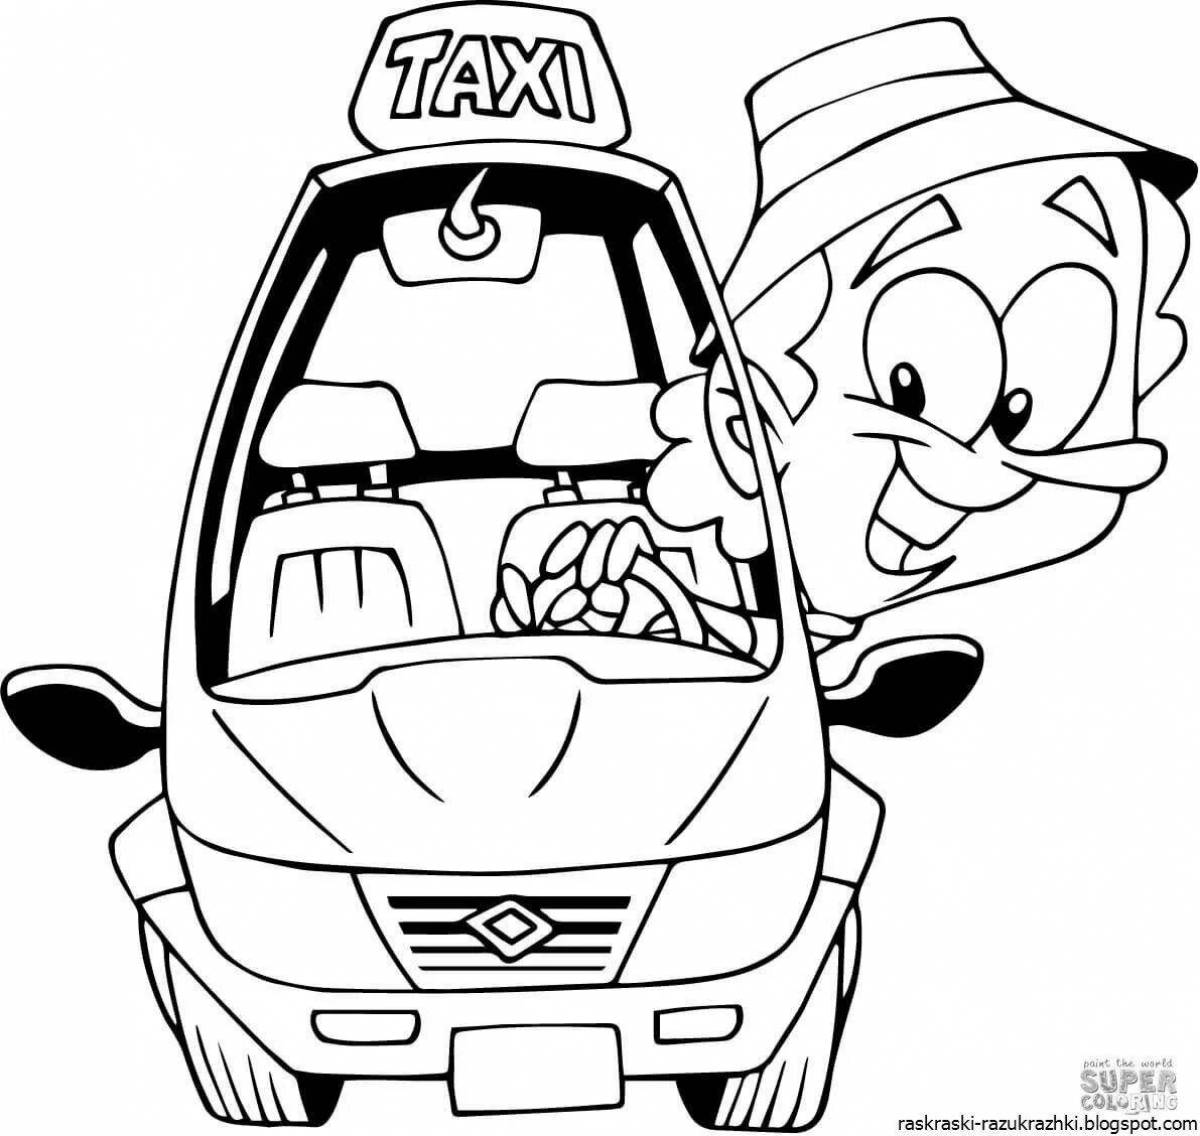 Animated Taxi Driver Coloring Page